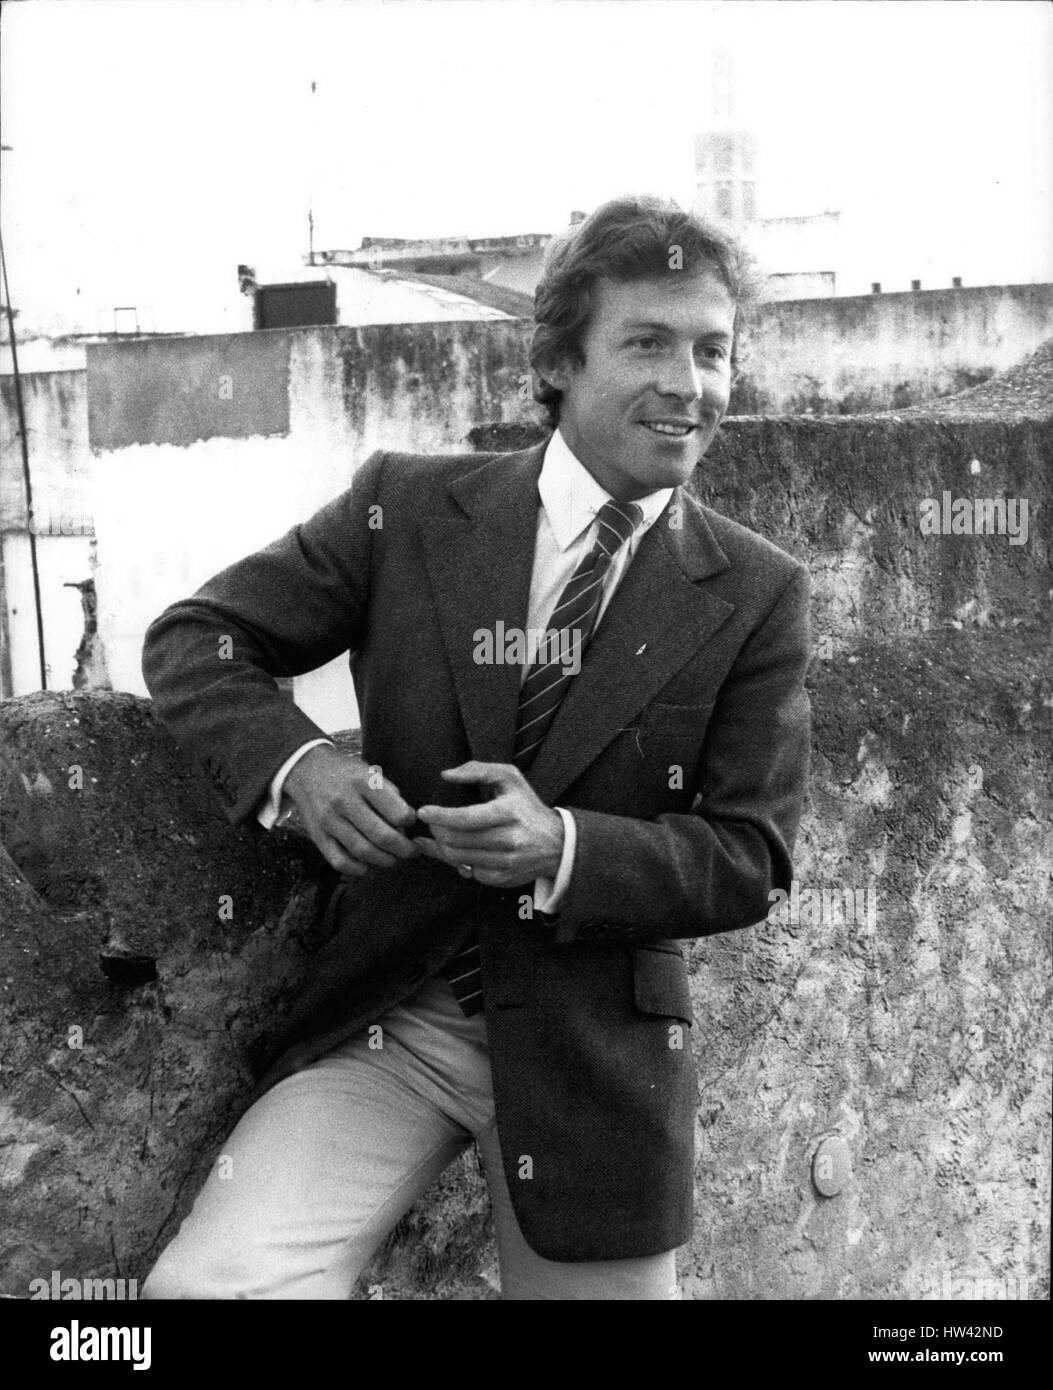 May 15, 1978 - I will never marry Princess Margaret says Roddy Llewellyn: Roddy Llewellyn the boyfriend of Princess Margaret said yesterday, in the heart of the Casbah in the ancient port of Tangier: There is no chance of my marrying Princess Margaret. In hi first interview since last week's announcement that Princess Margaret and Lord Snowdon are to be divorced, Roddy said that he believed his friendship with the Princess had been Grossly Exaggerated, when asked why, he replied 'I don't want to talk about it anymore, and then said categorically that eh would never marry the Princess but would Stock Photo